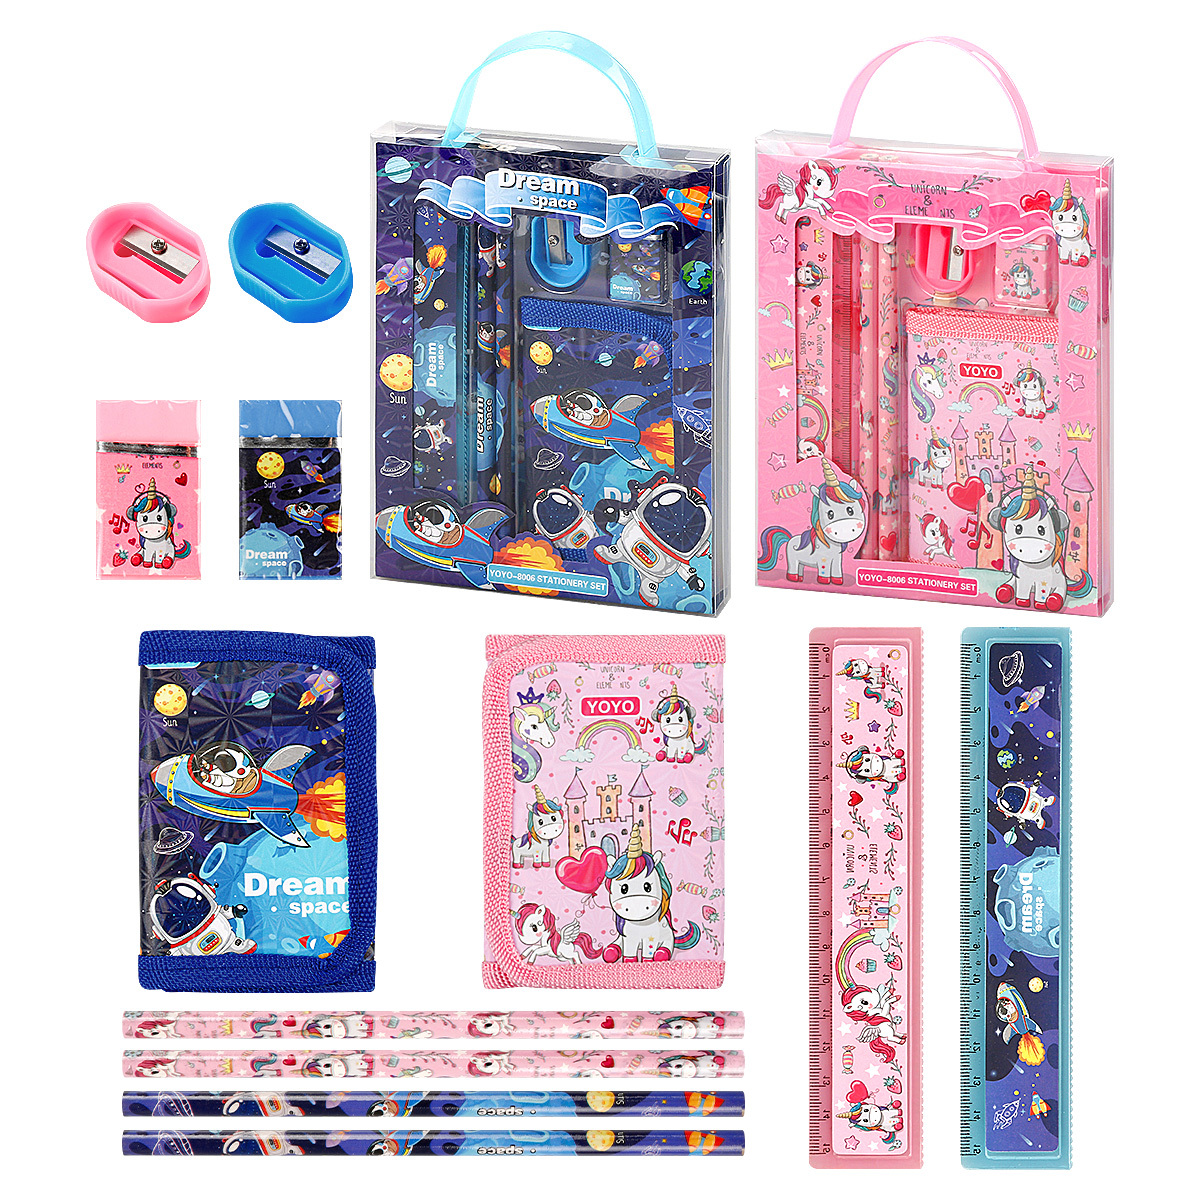 

Astronaut Unicorn Stationery Set Stationery Gift Set Include Purse 2 Pcs Pencils A Ruler Eraser And Pencil Sharpener Stationery Sets Studying Accessories